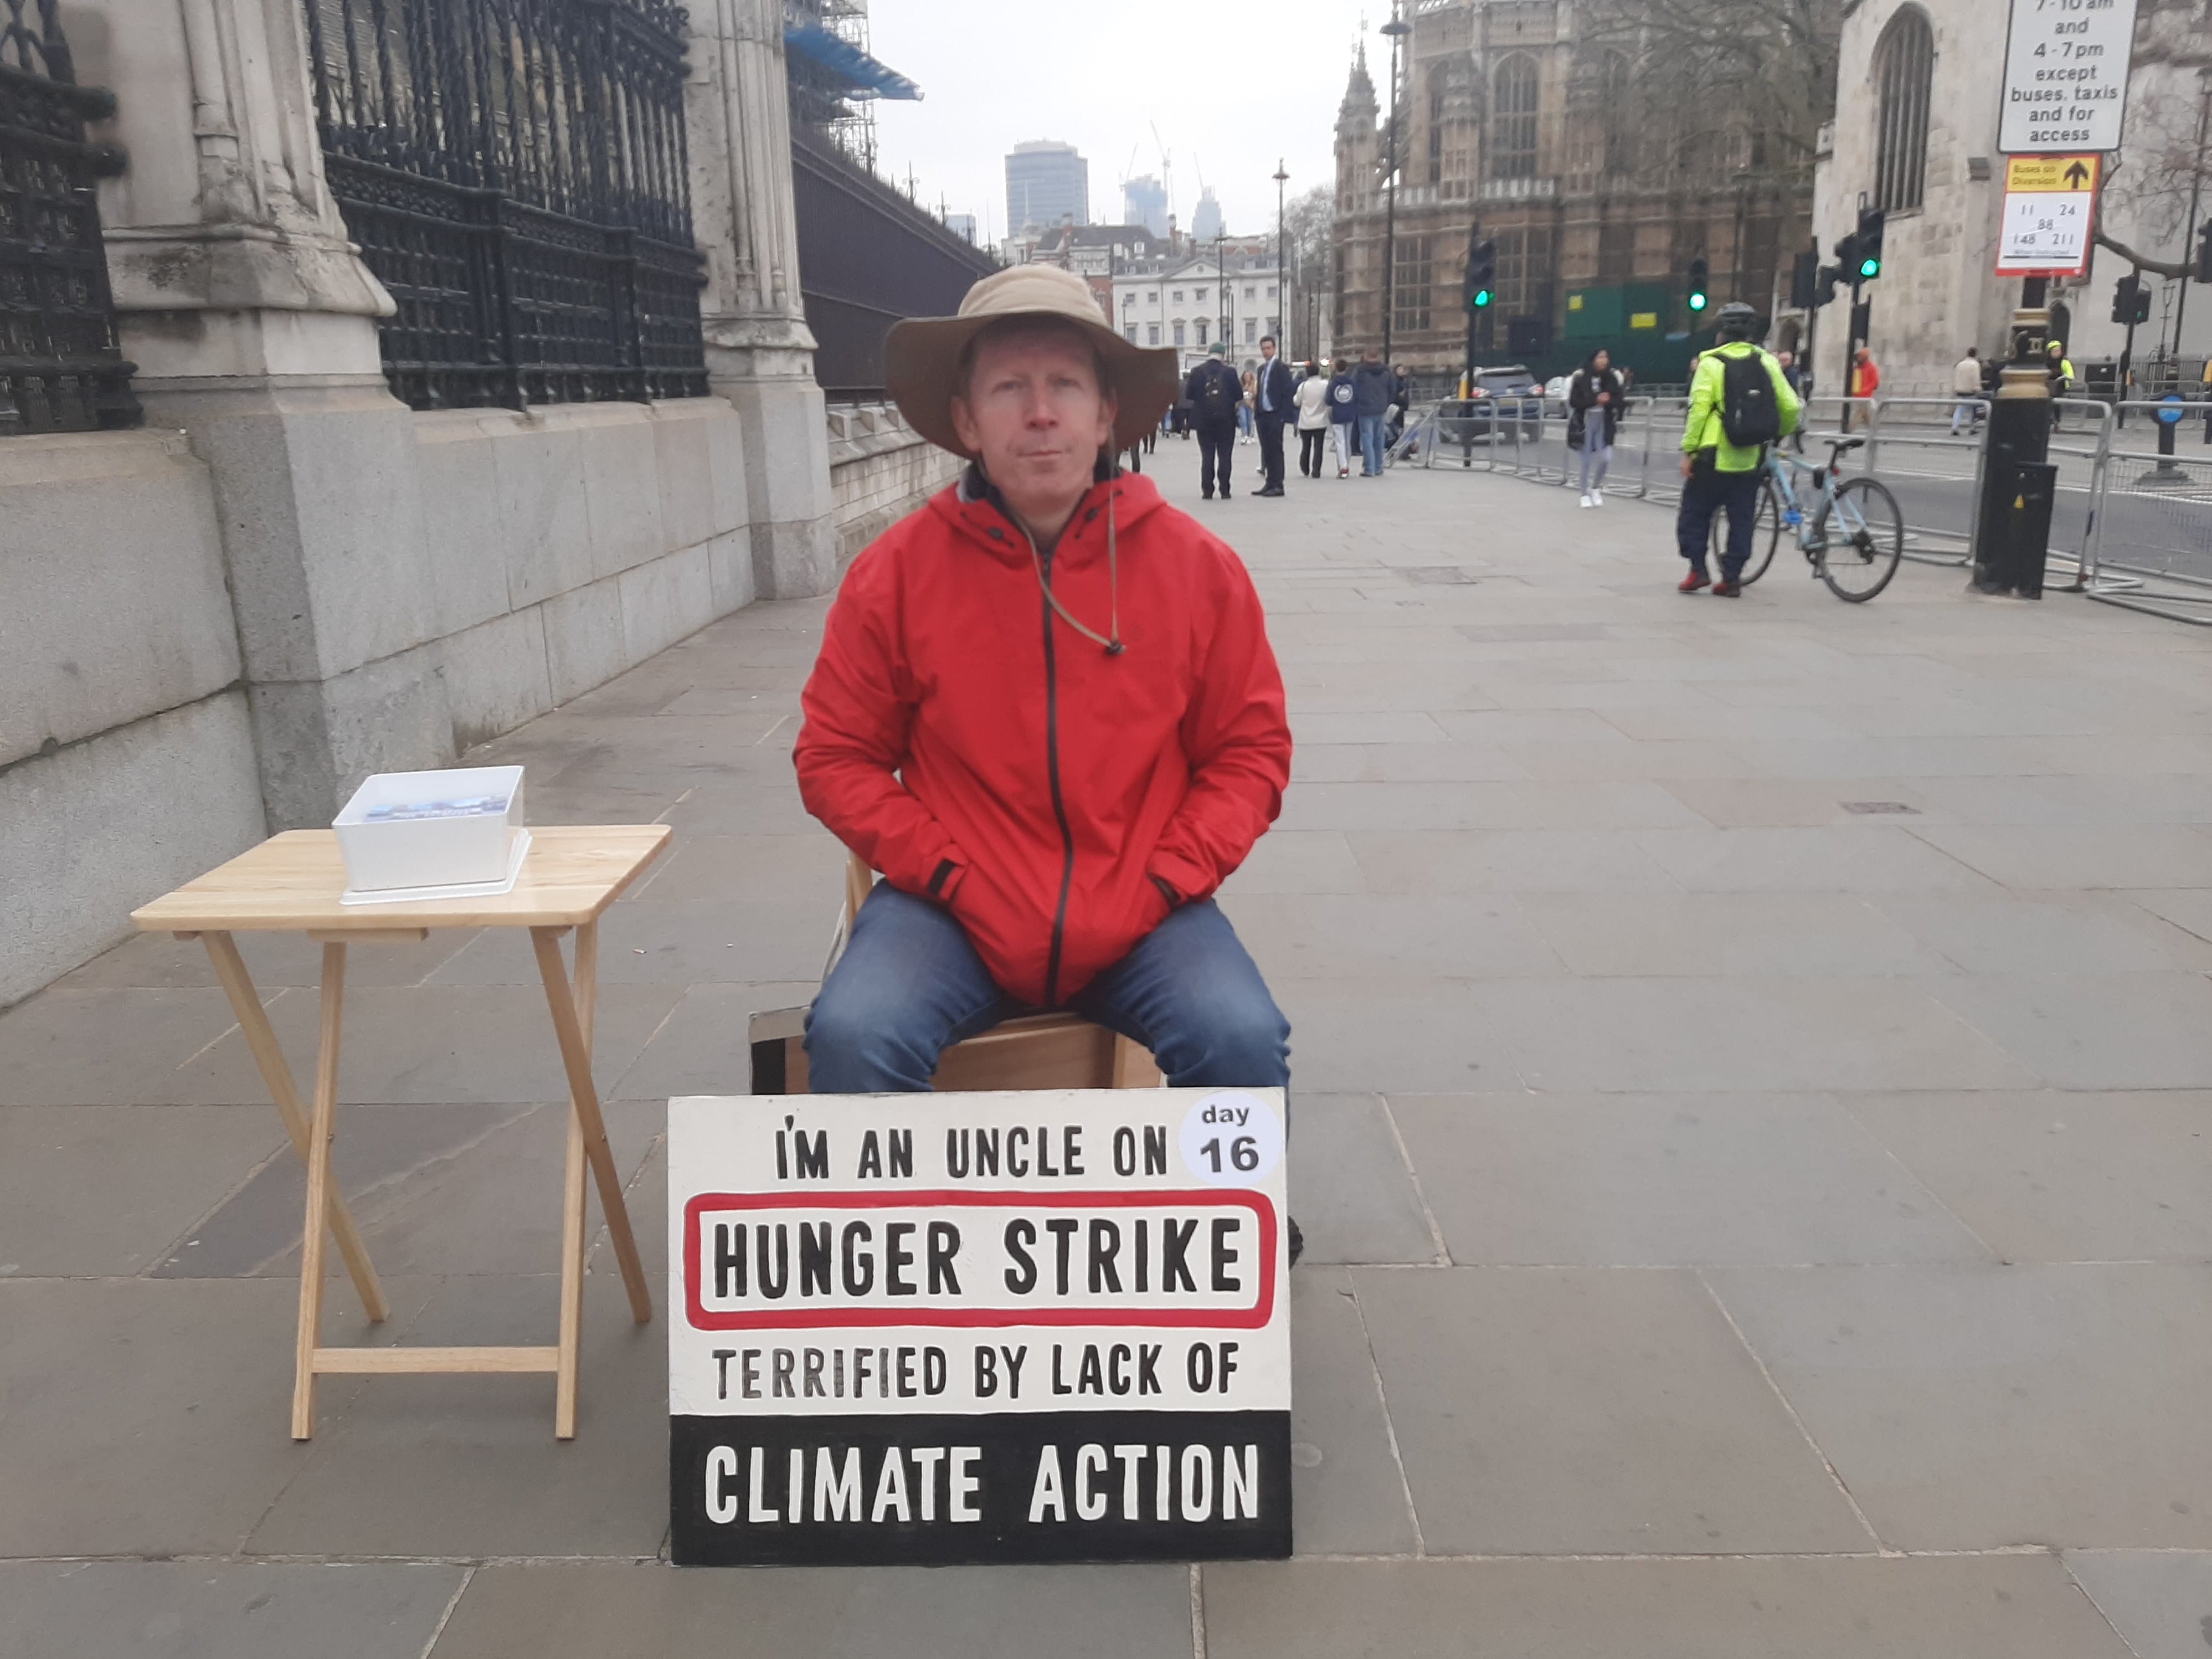 Angus Rose has ended his hunger strike outside the UK parliament after 37 days